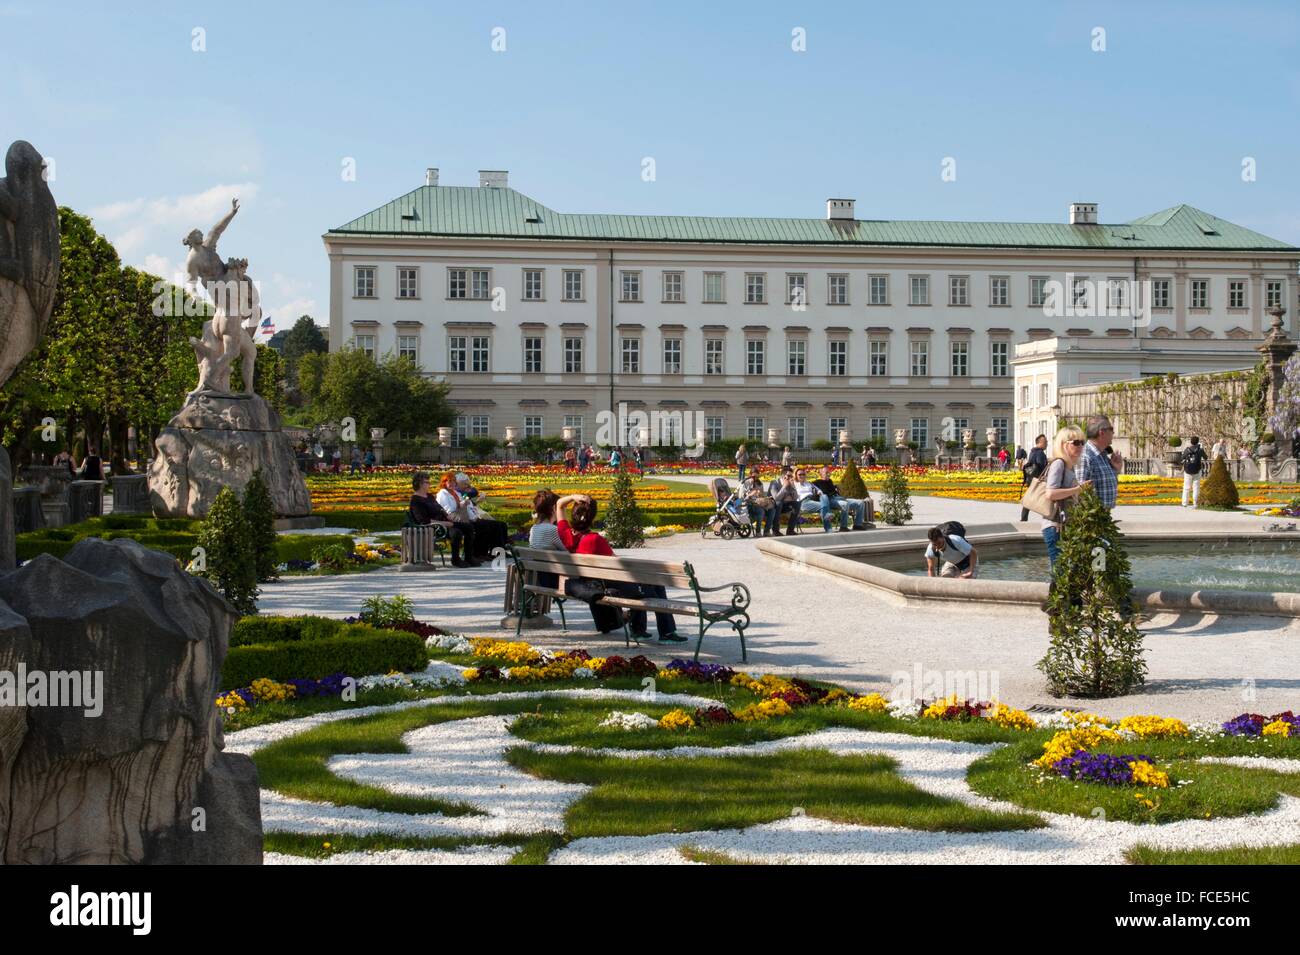 Mirabell Palace, Mirabell Garden, the historical center of the city of Salzbur Stock Photo